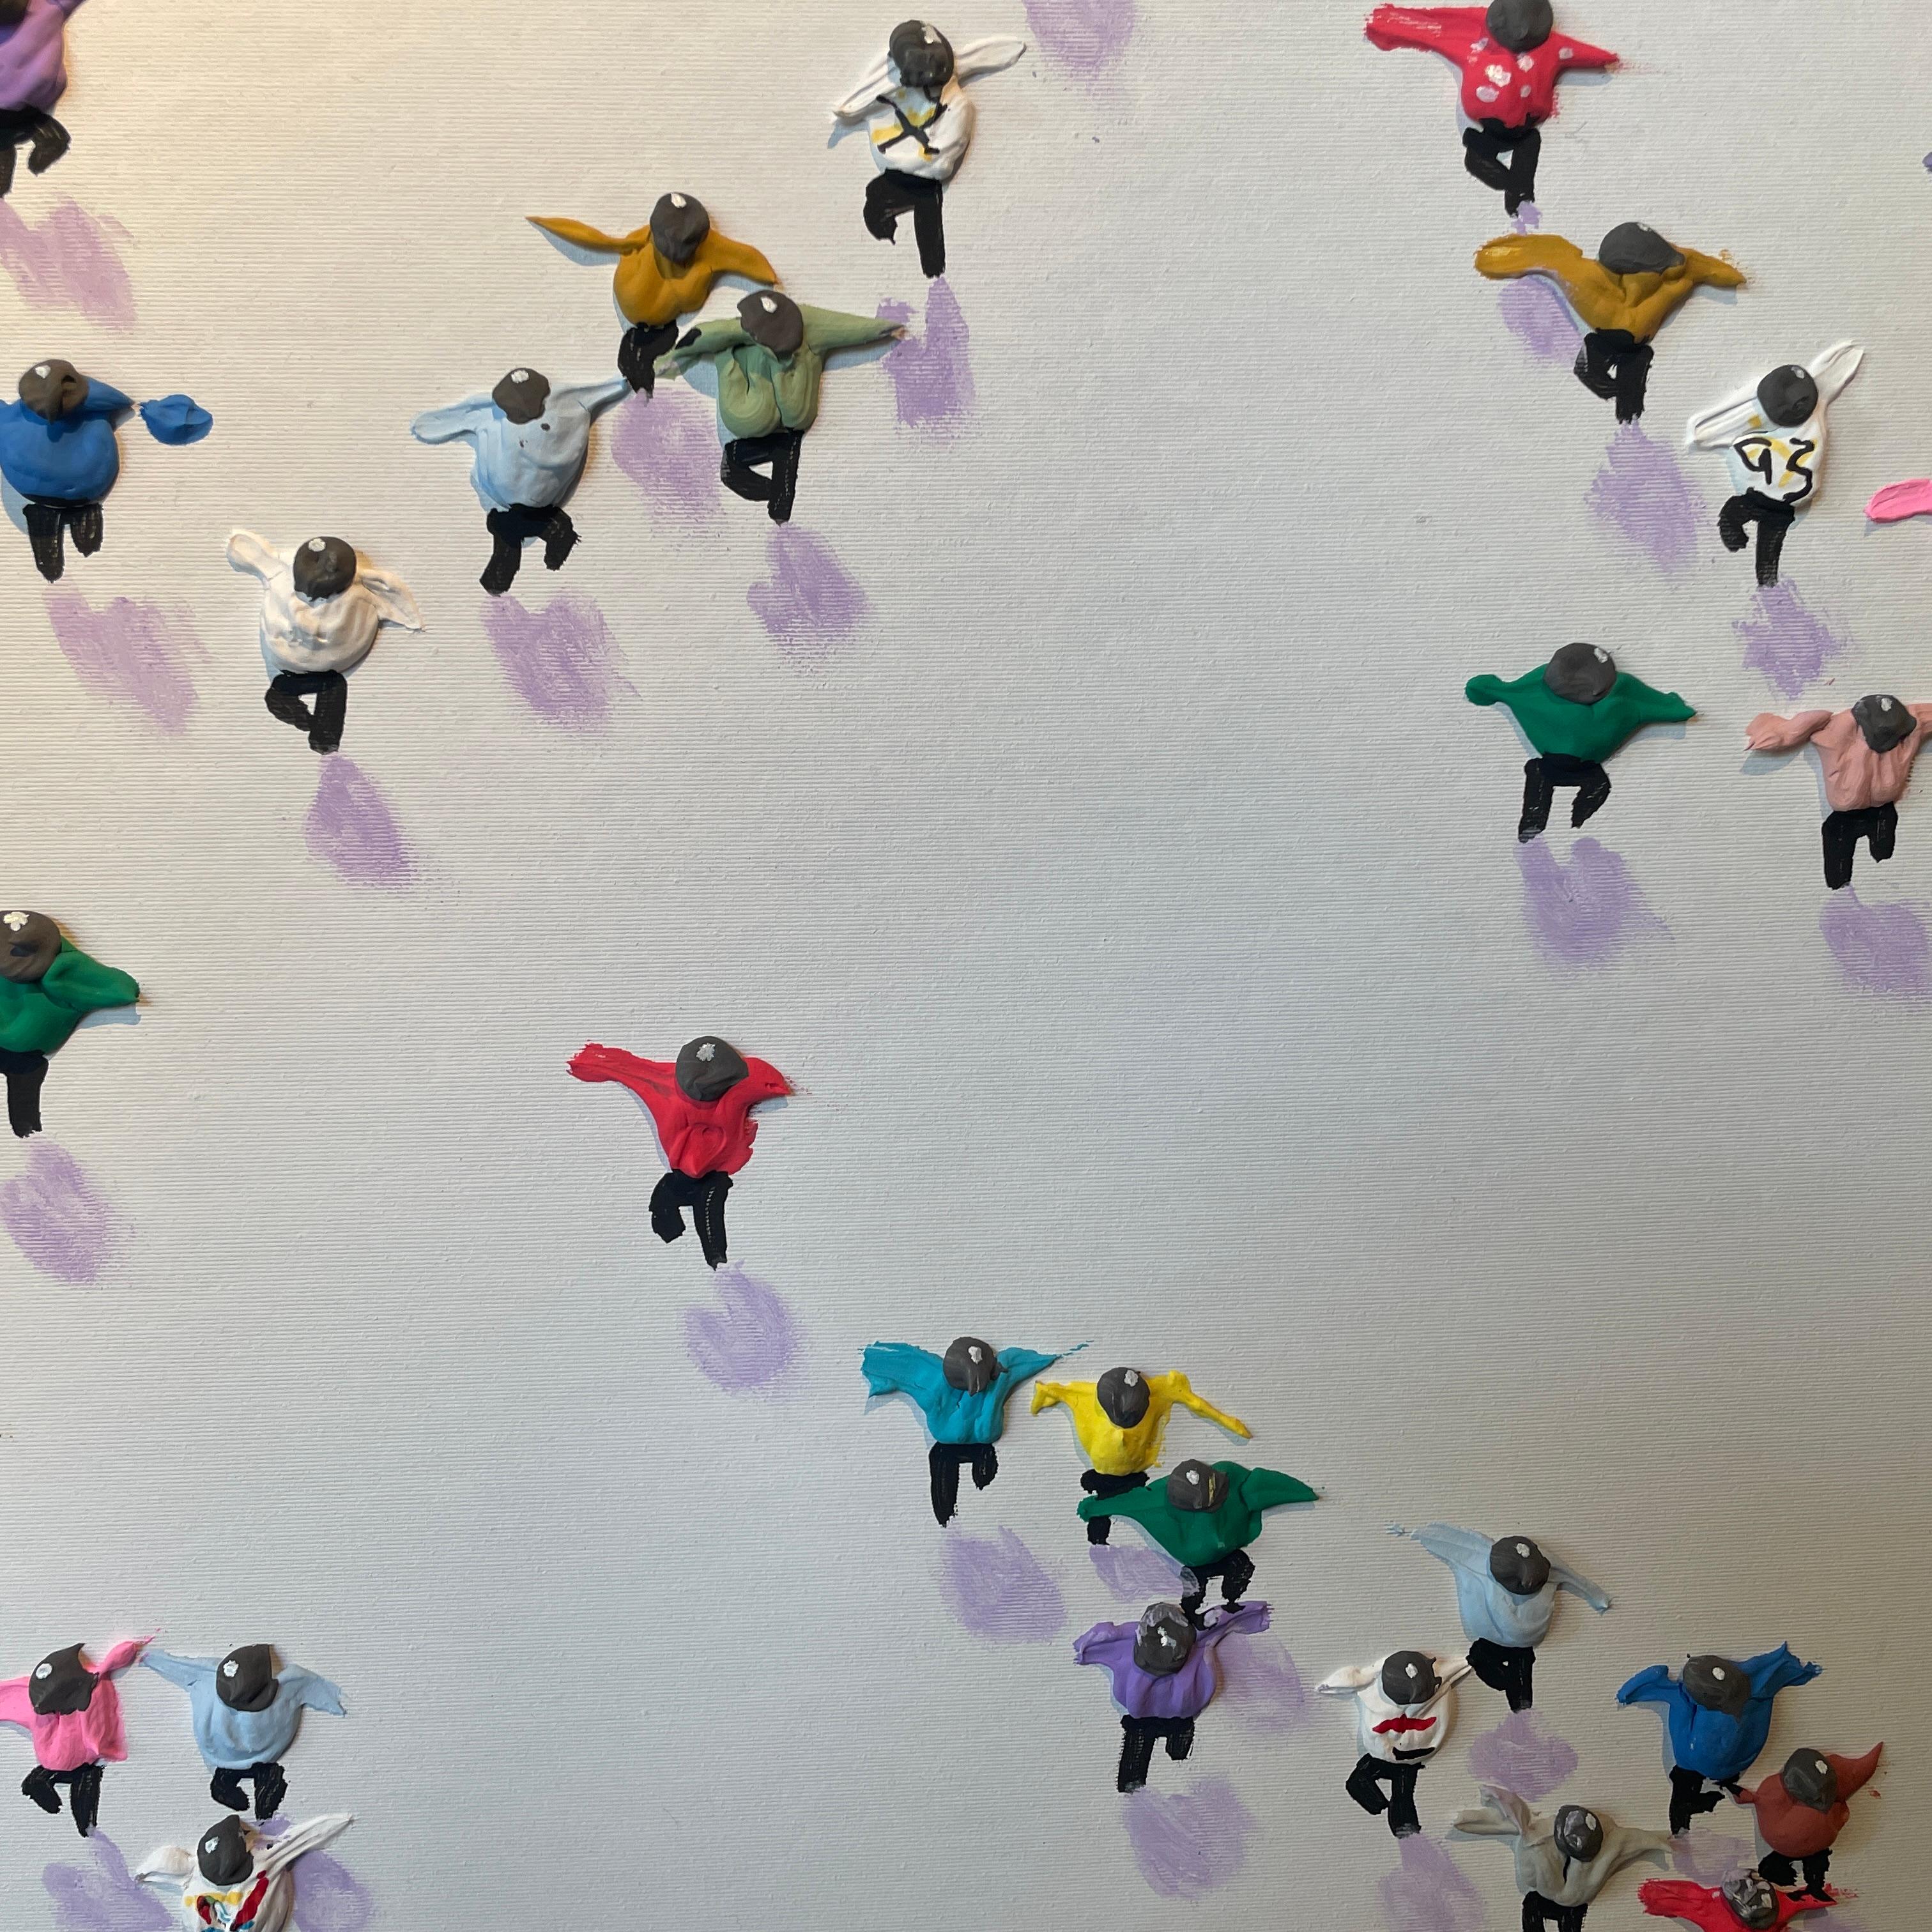 'Between Us' by Max Todd is a fun and vibrant contemporary 3D painting of figures dancing on white. Todd has created a work that is vibrant, colourful and bold!

Max Todd uses contemporary techniques to produce his works & the 3D dimension makes Max